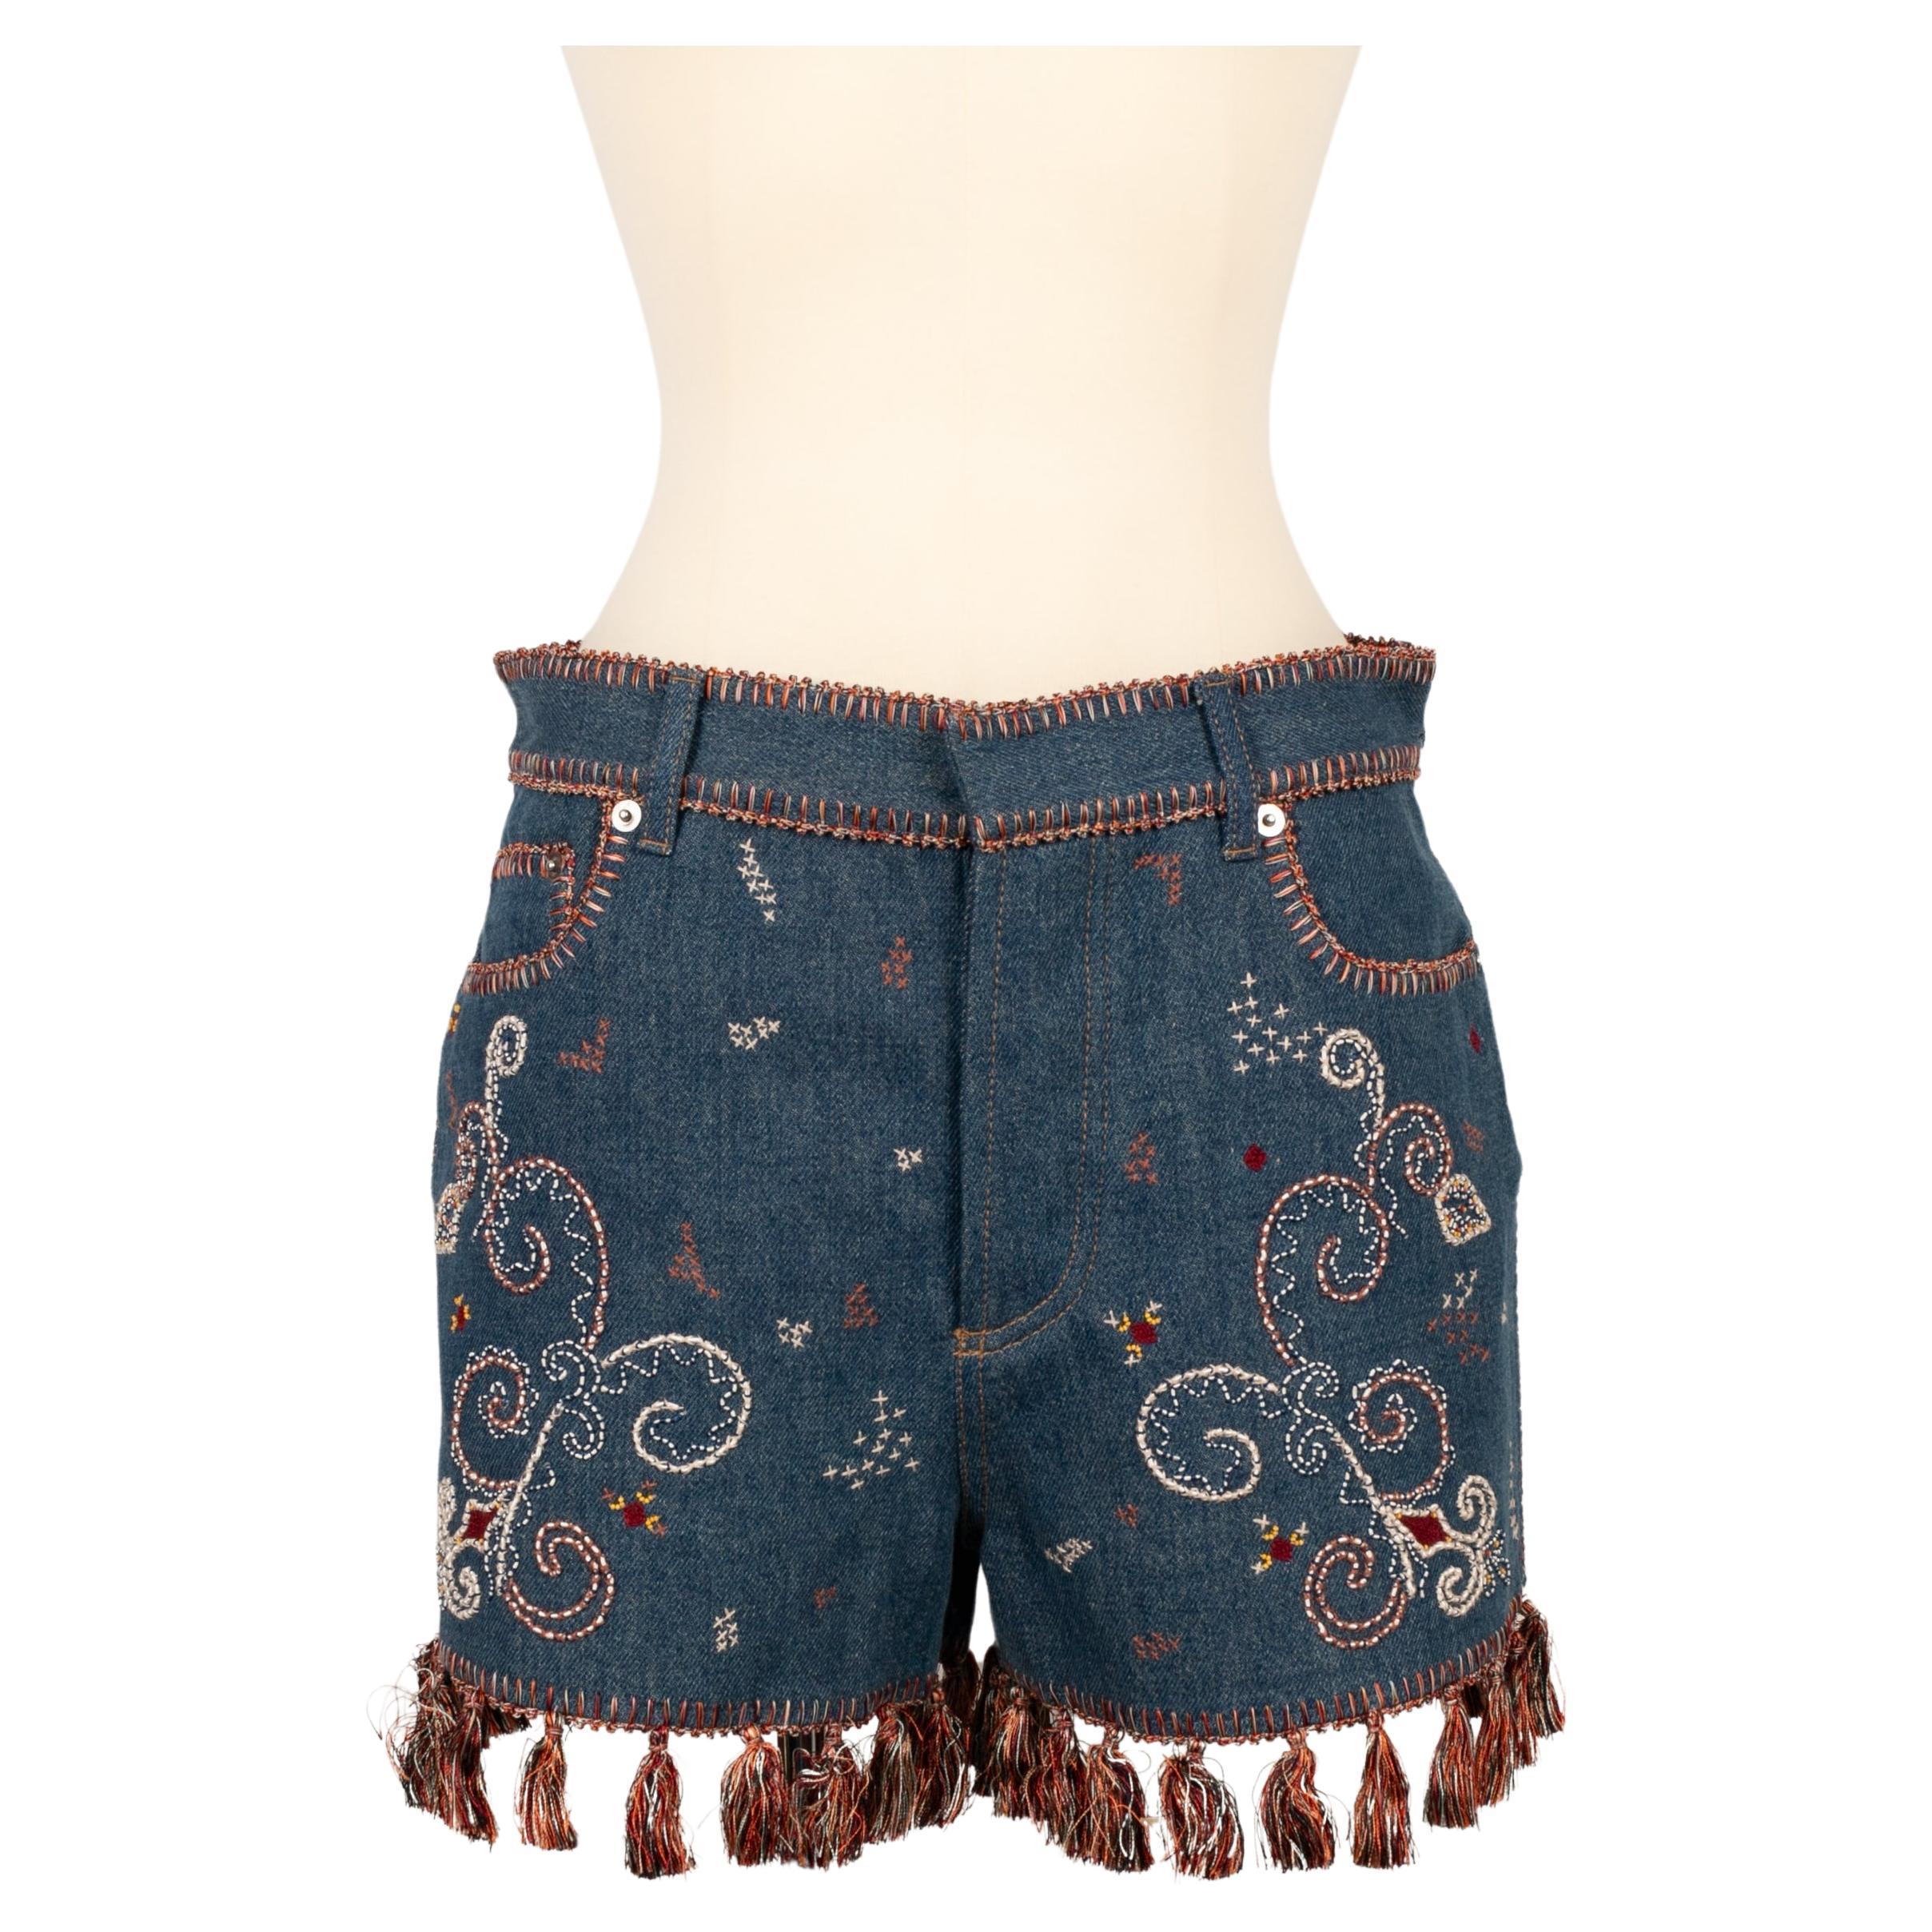 Dior Denim Shorts Sewn with Pearls and Trimmings Ornaments, 2008 For Sale